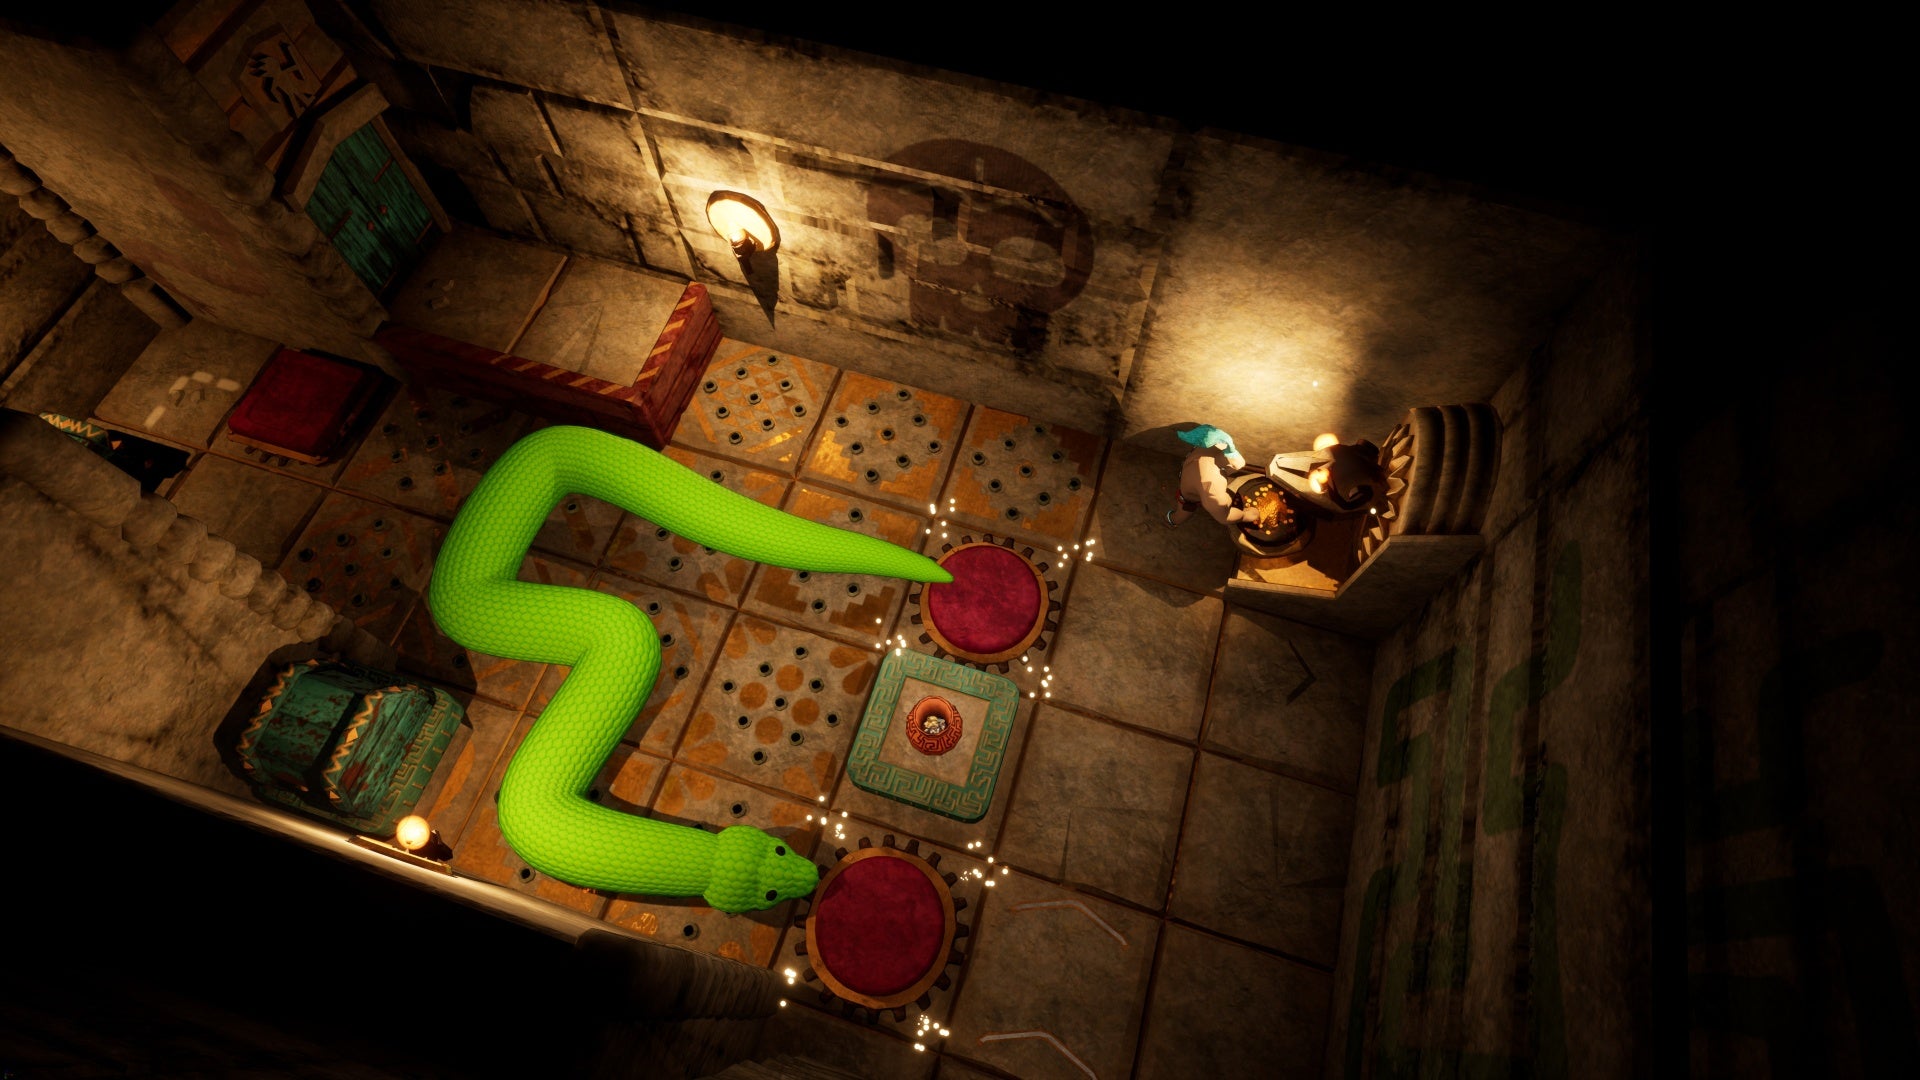 A screenshot of Temple Of Snek, showing a large green snake stretched across a gridded floor seemingly covered in switches and potential spikes.